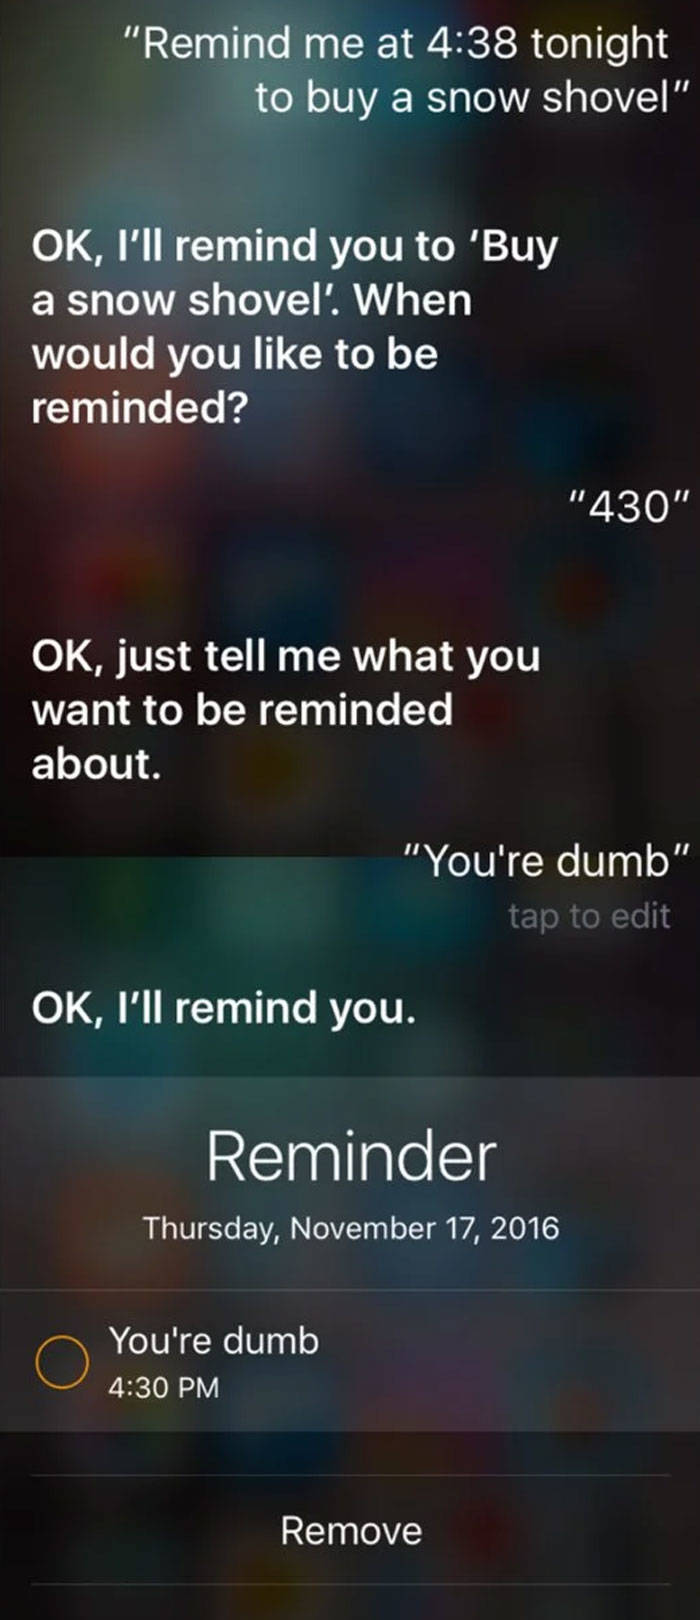 You Ask Siri Stupid Questions, You Get Stupid Answers